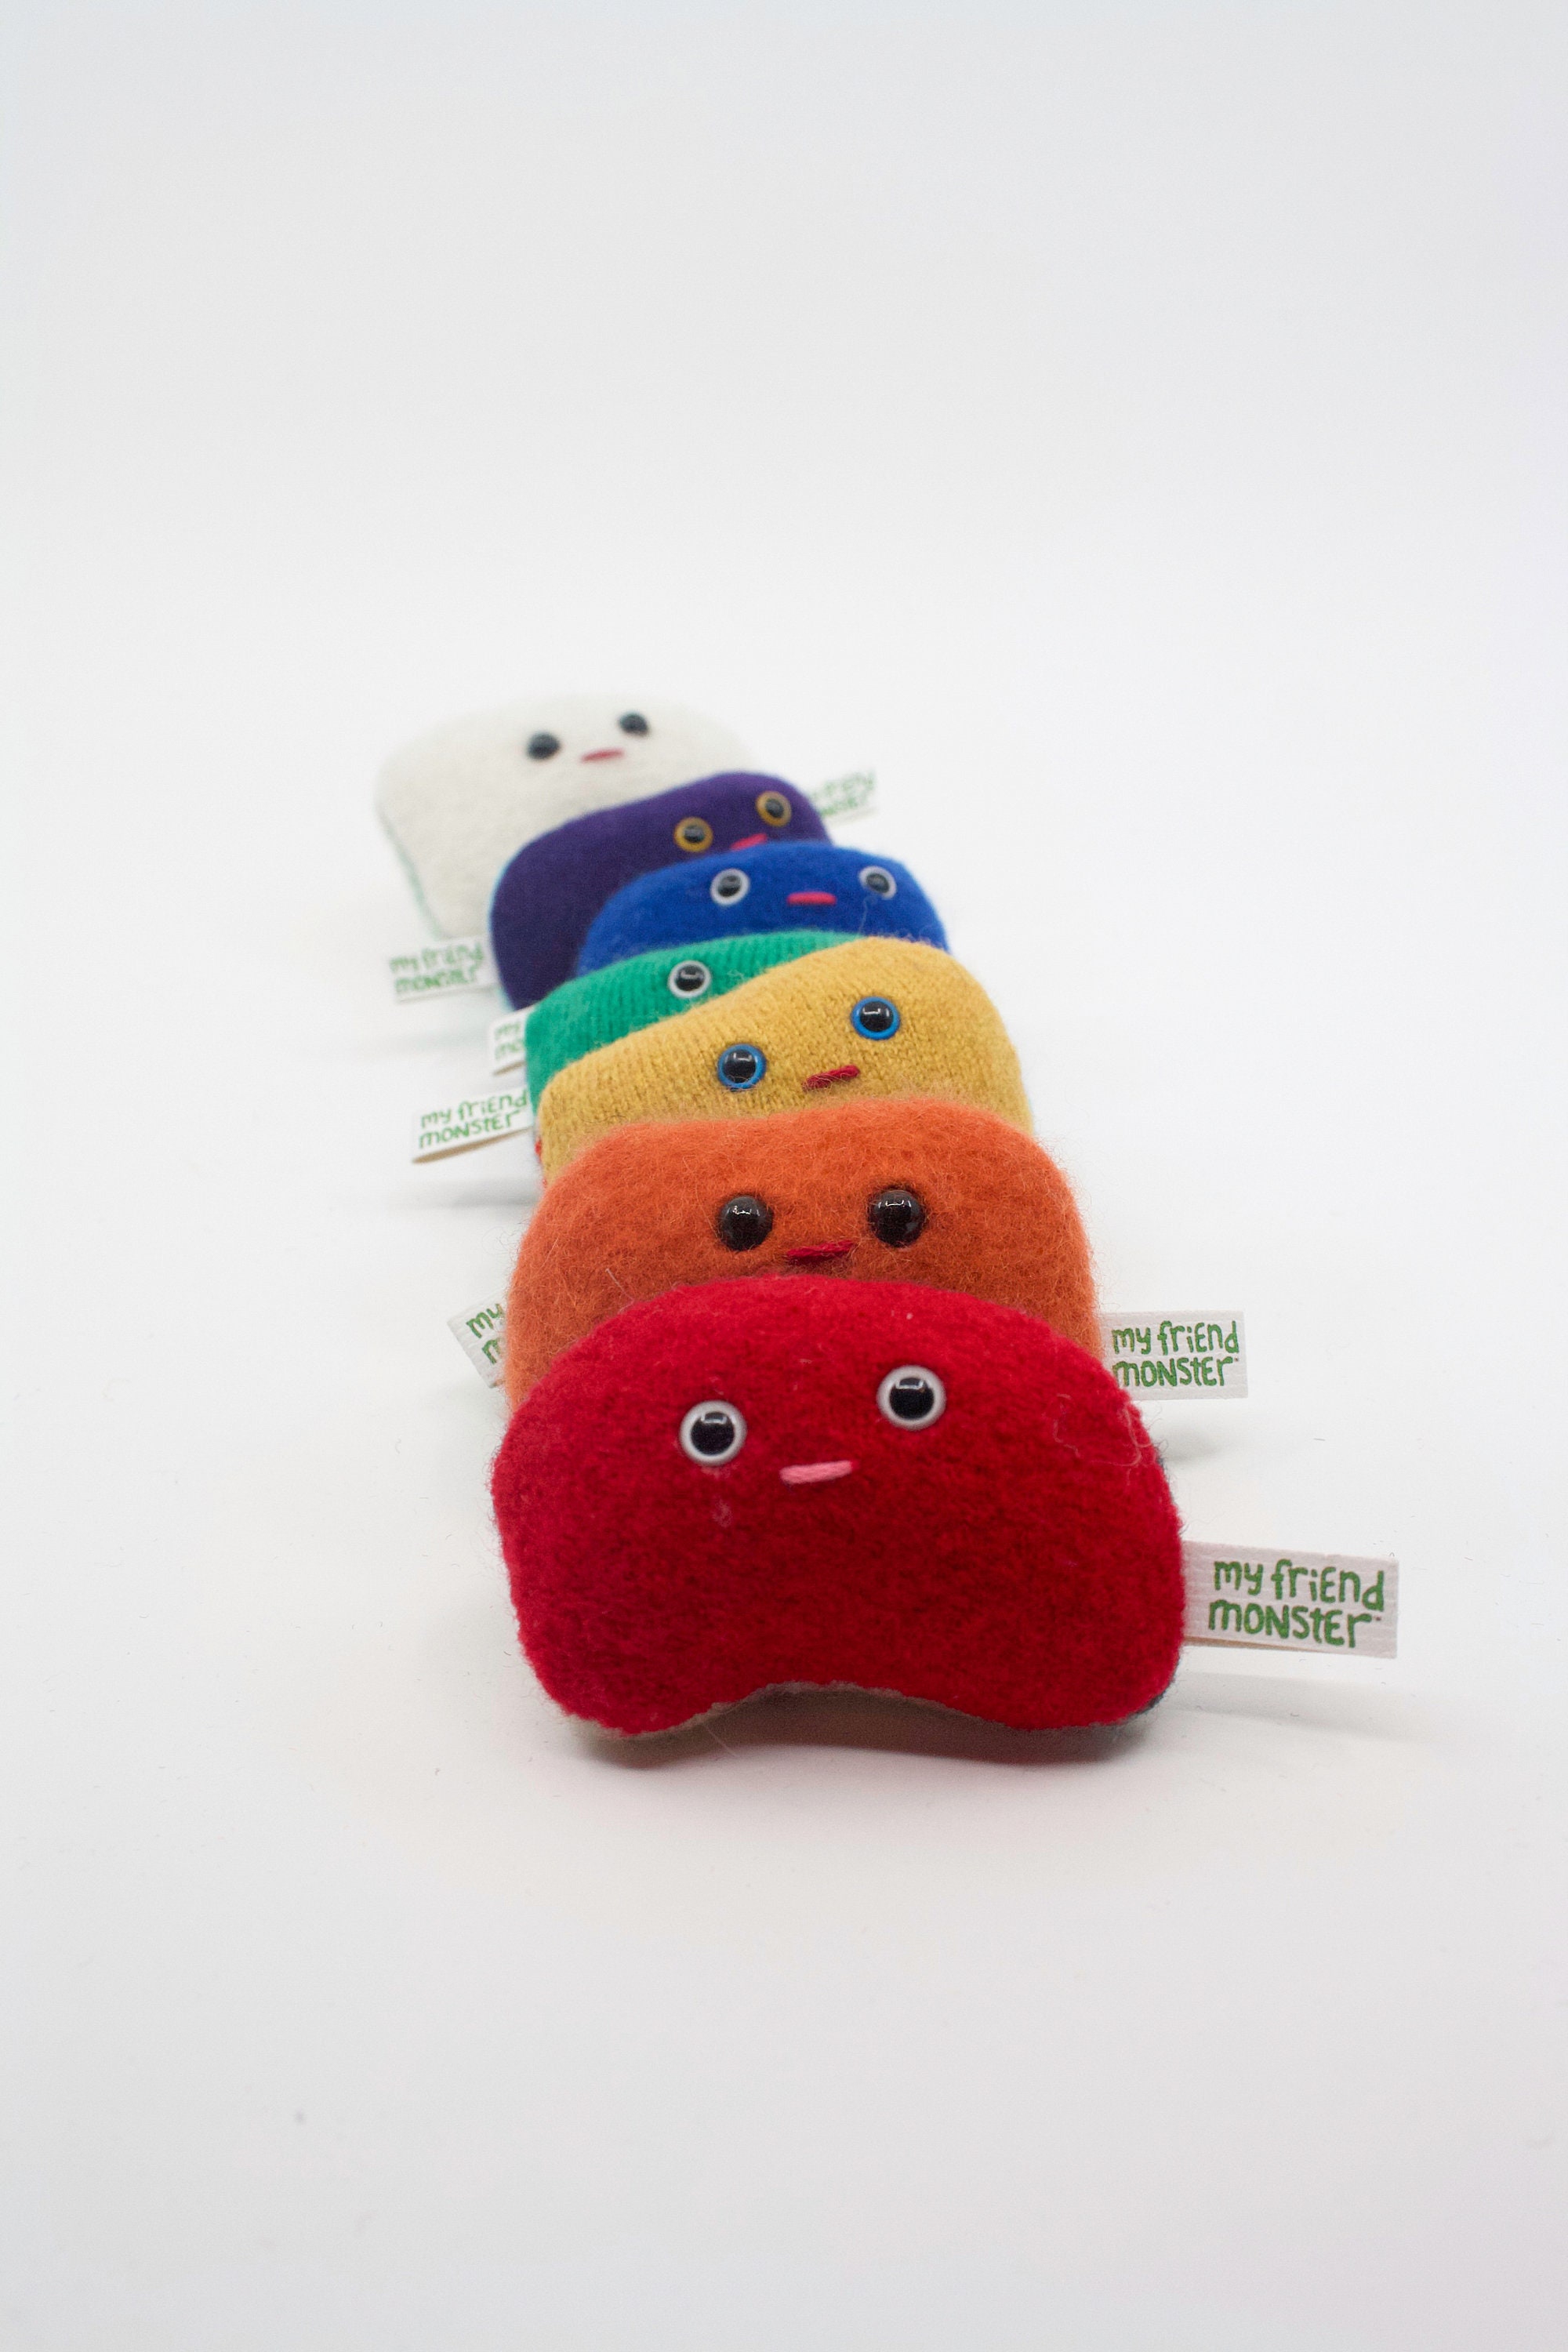 Micro Monsters SET OF 3 Tiny Plush Sweater Monsters Stuffed Monster Cute  Pocket Monster -  Canada